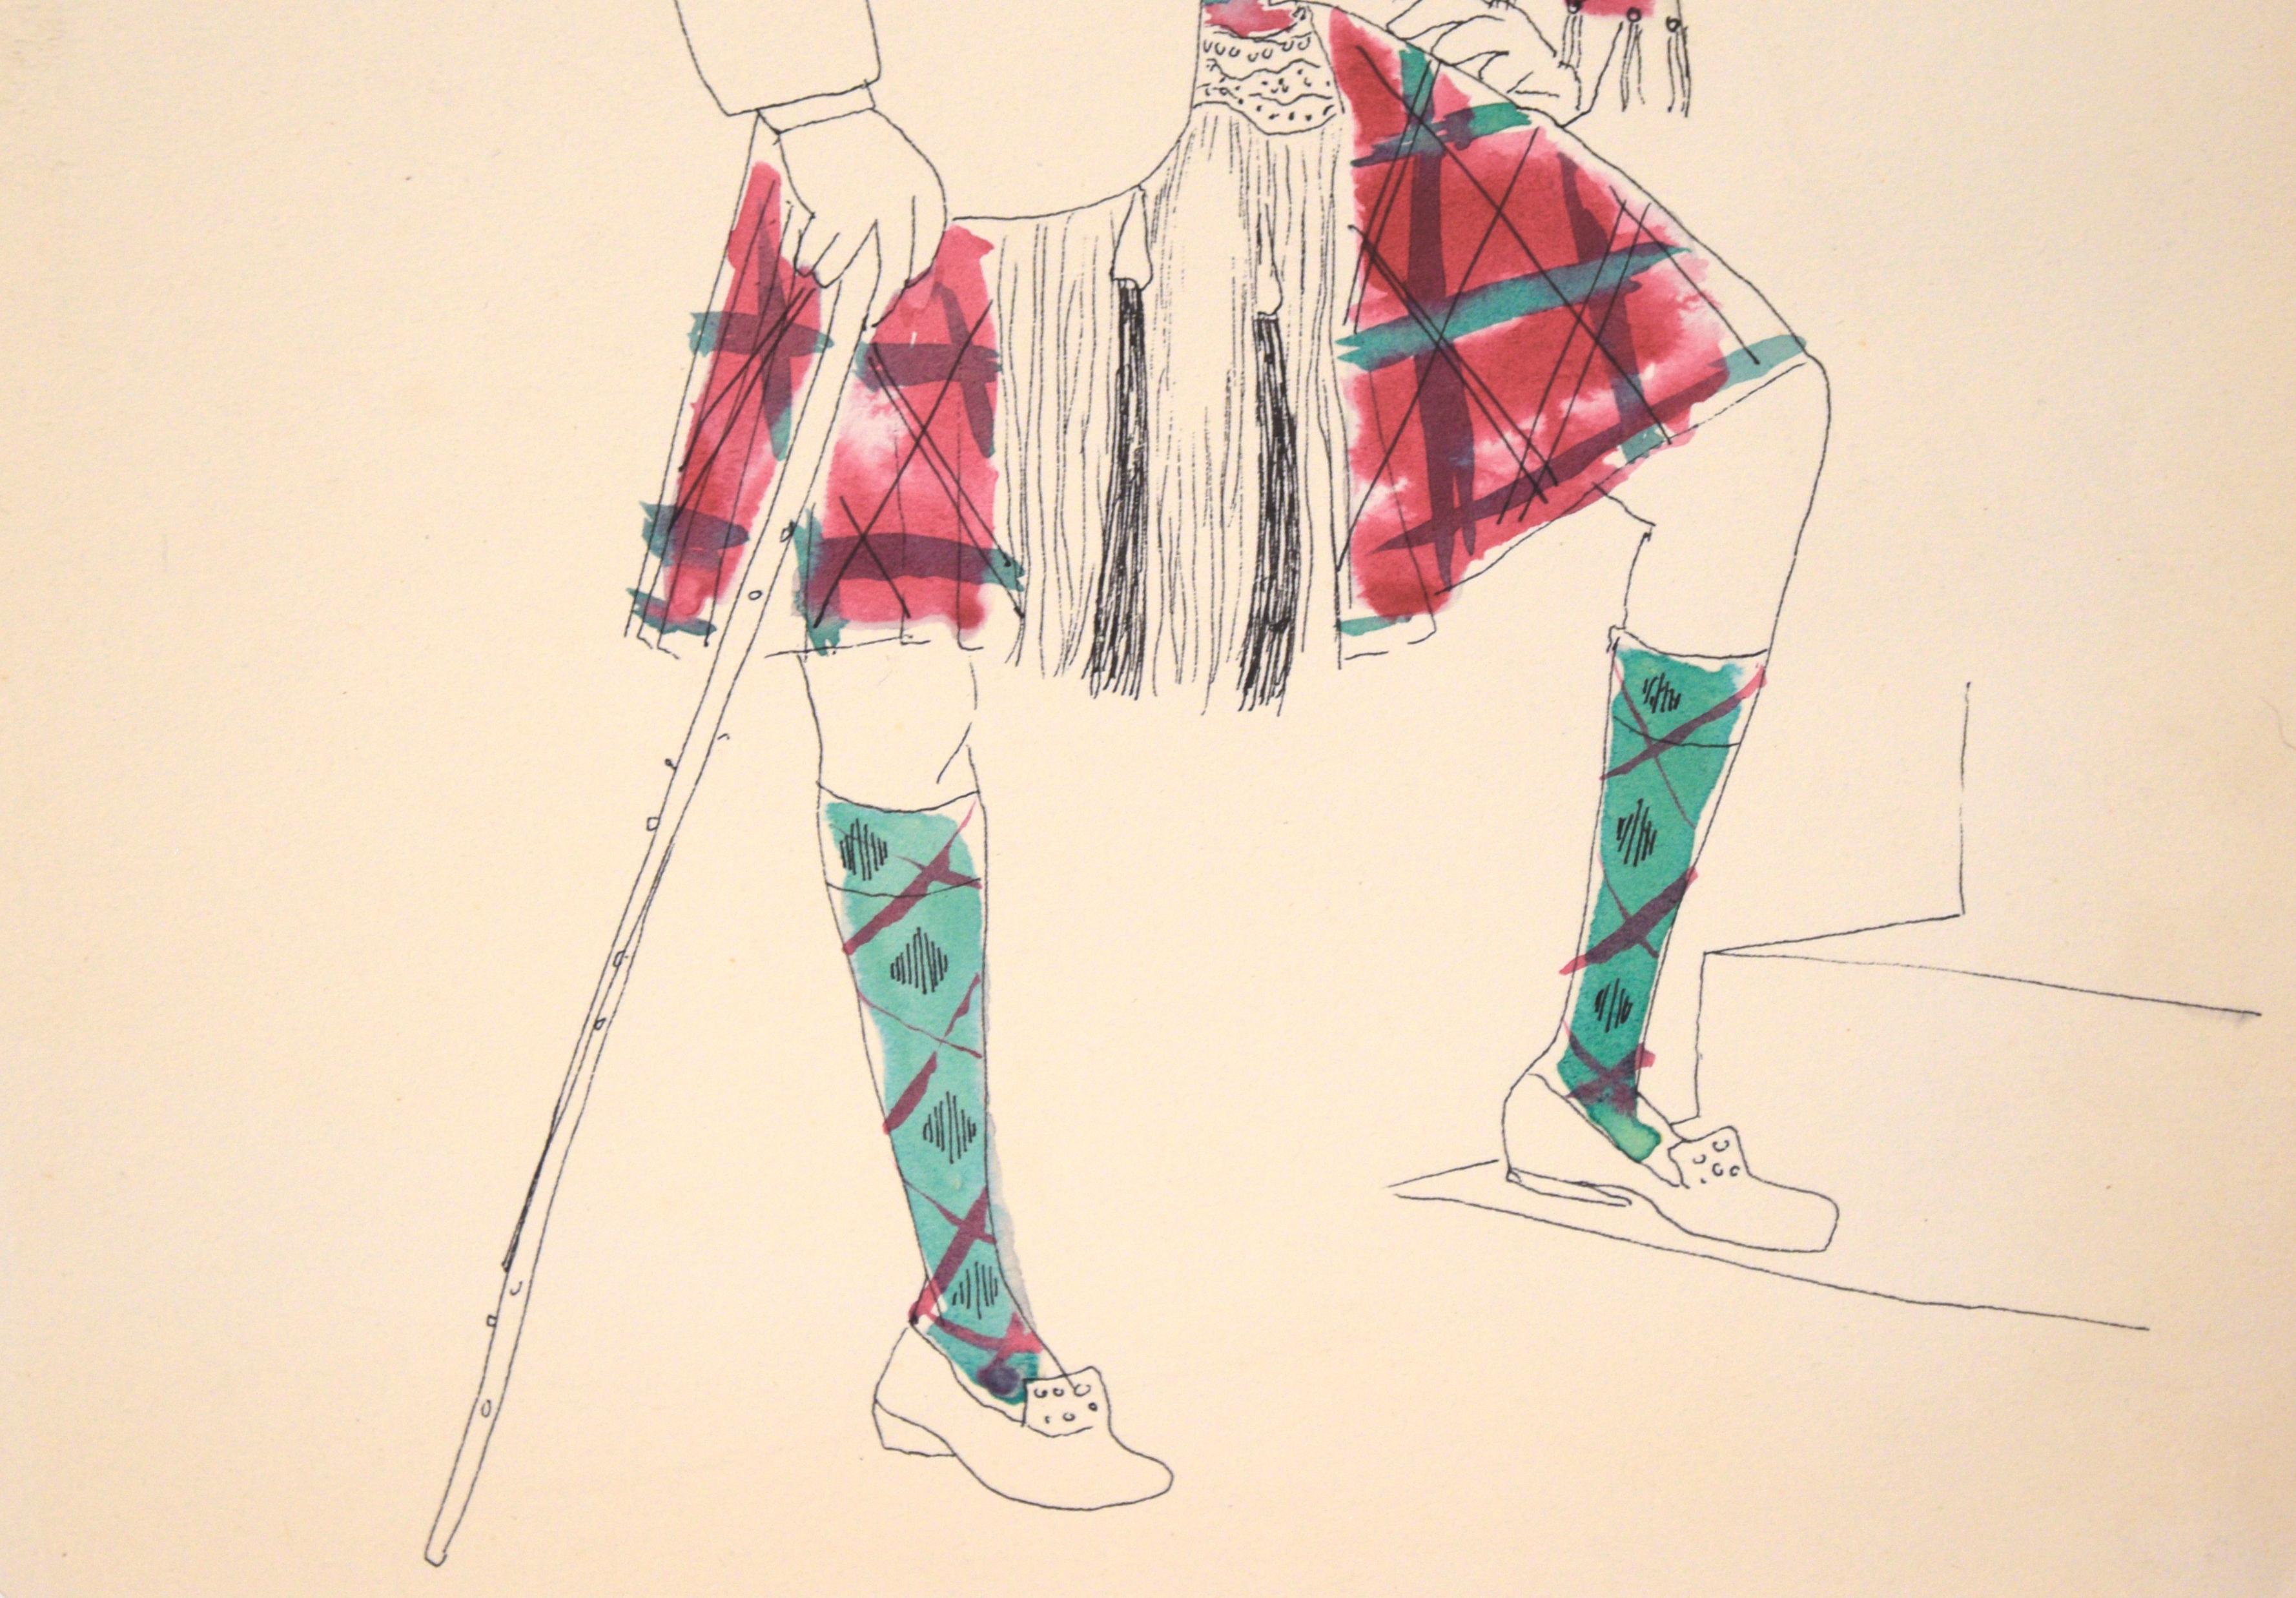 Man in a Scottish Kilt - Vintage Illustration in Ink and Watercolor

A Scottish man stands holding a cane and wearing the traditional dress - a belted tartan in magenta and green with a sporran and a tam hat - in this illustration by Irene Pattinson